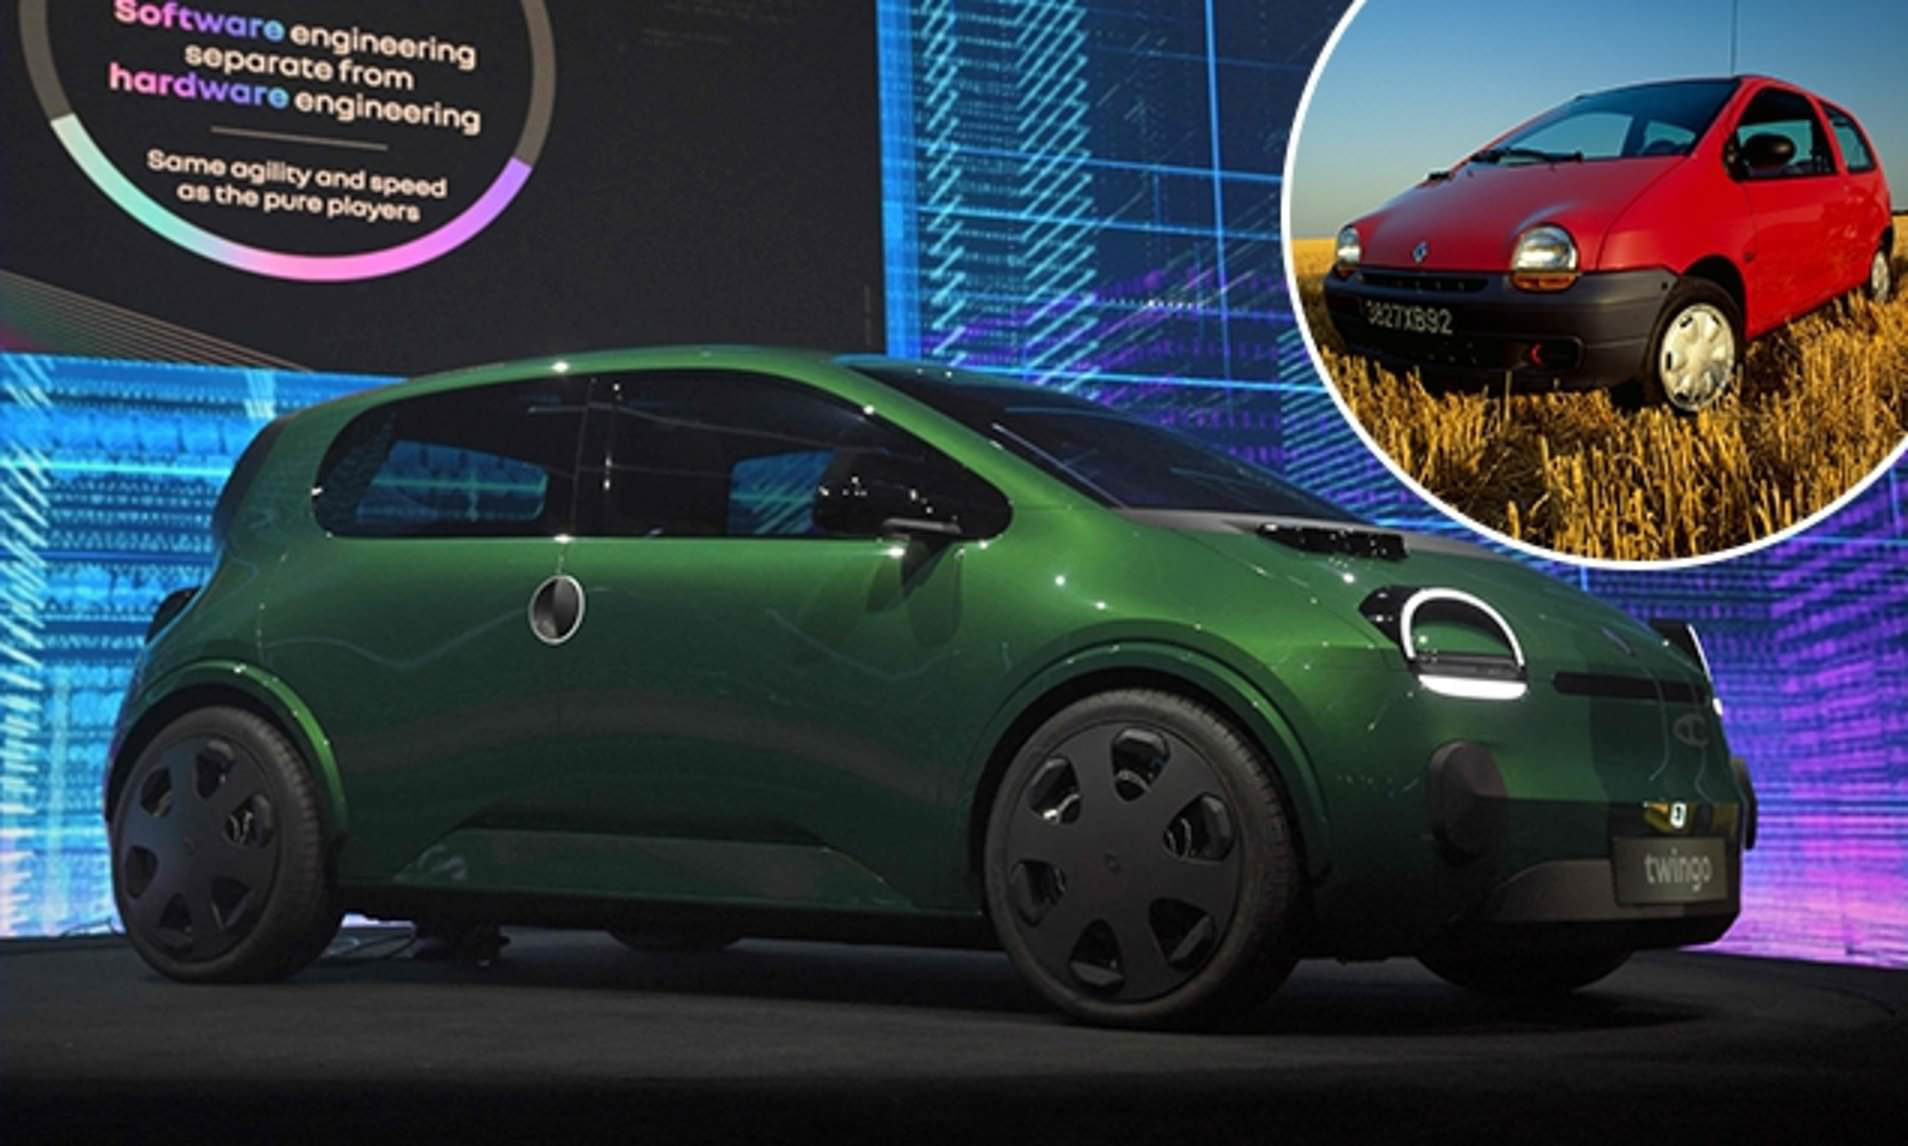 Renault Twingo to be reborn as an affordable EV: Electric city car is due  in 2026 and will cost less than £17,000 to rival Chinese newcomers